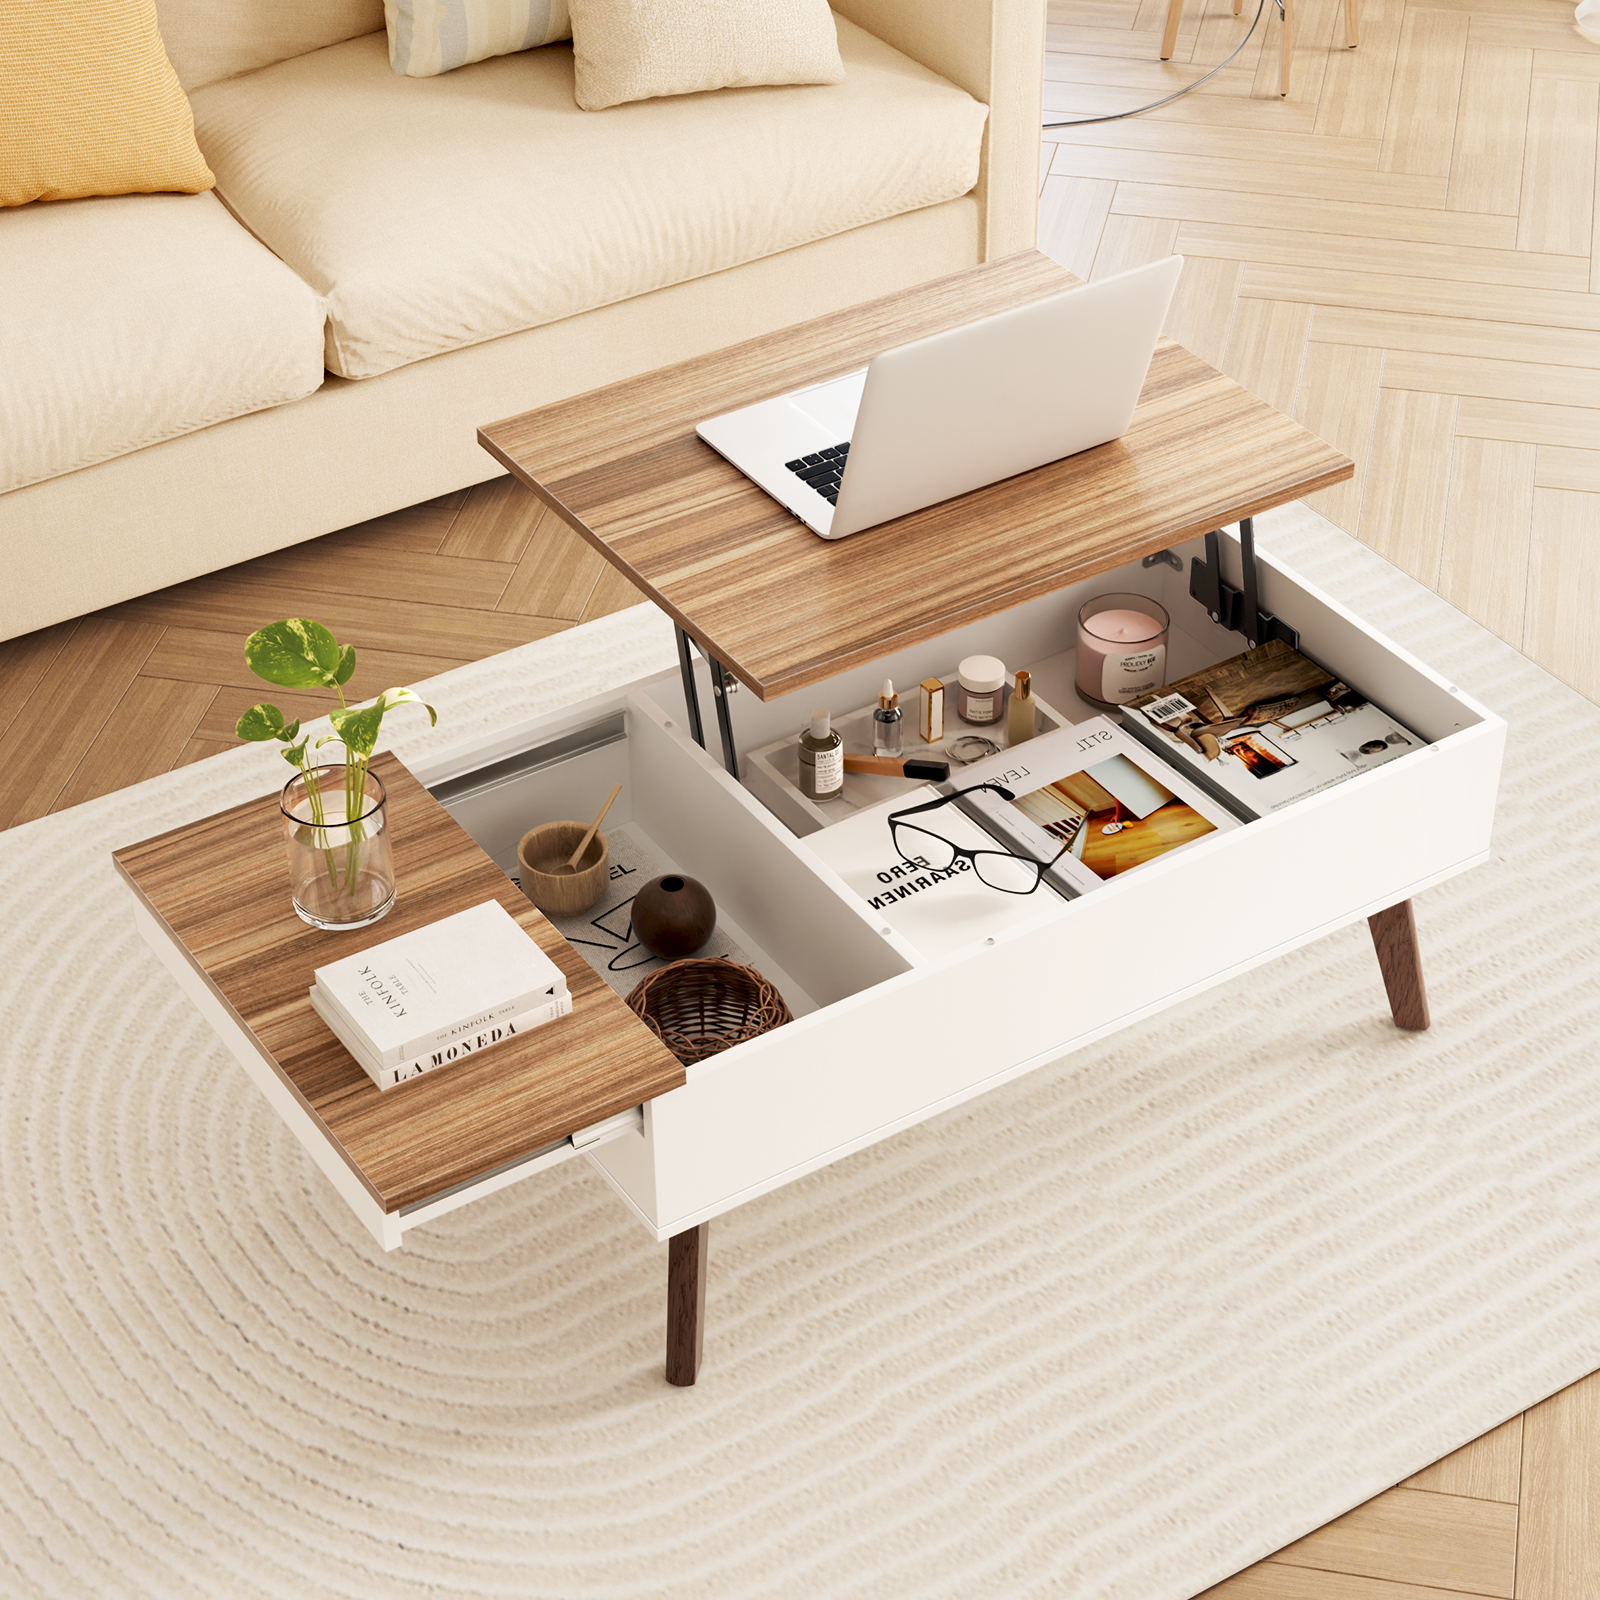 Bidiso Lift Top Coffee Table, Ten Minute Install Table Center with Hidden Storage Compartments, Rising Tabletop Dining for Living Room